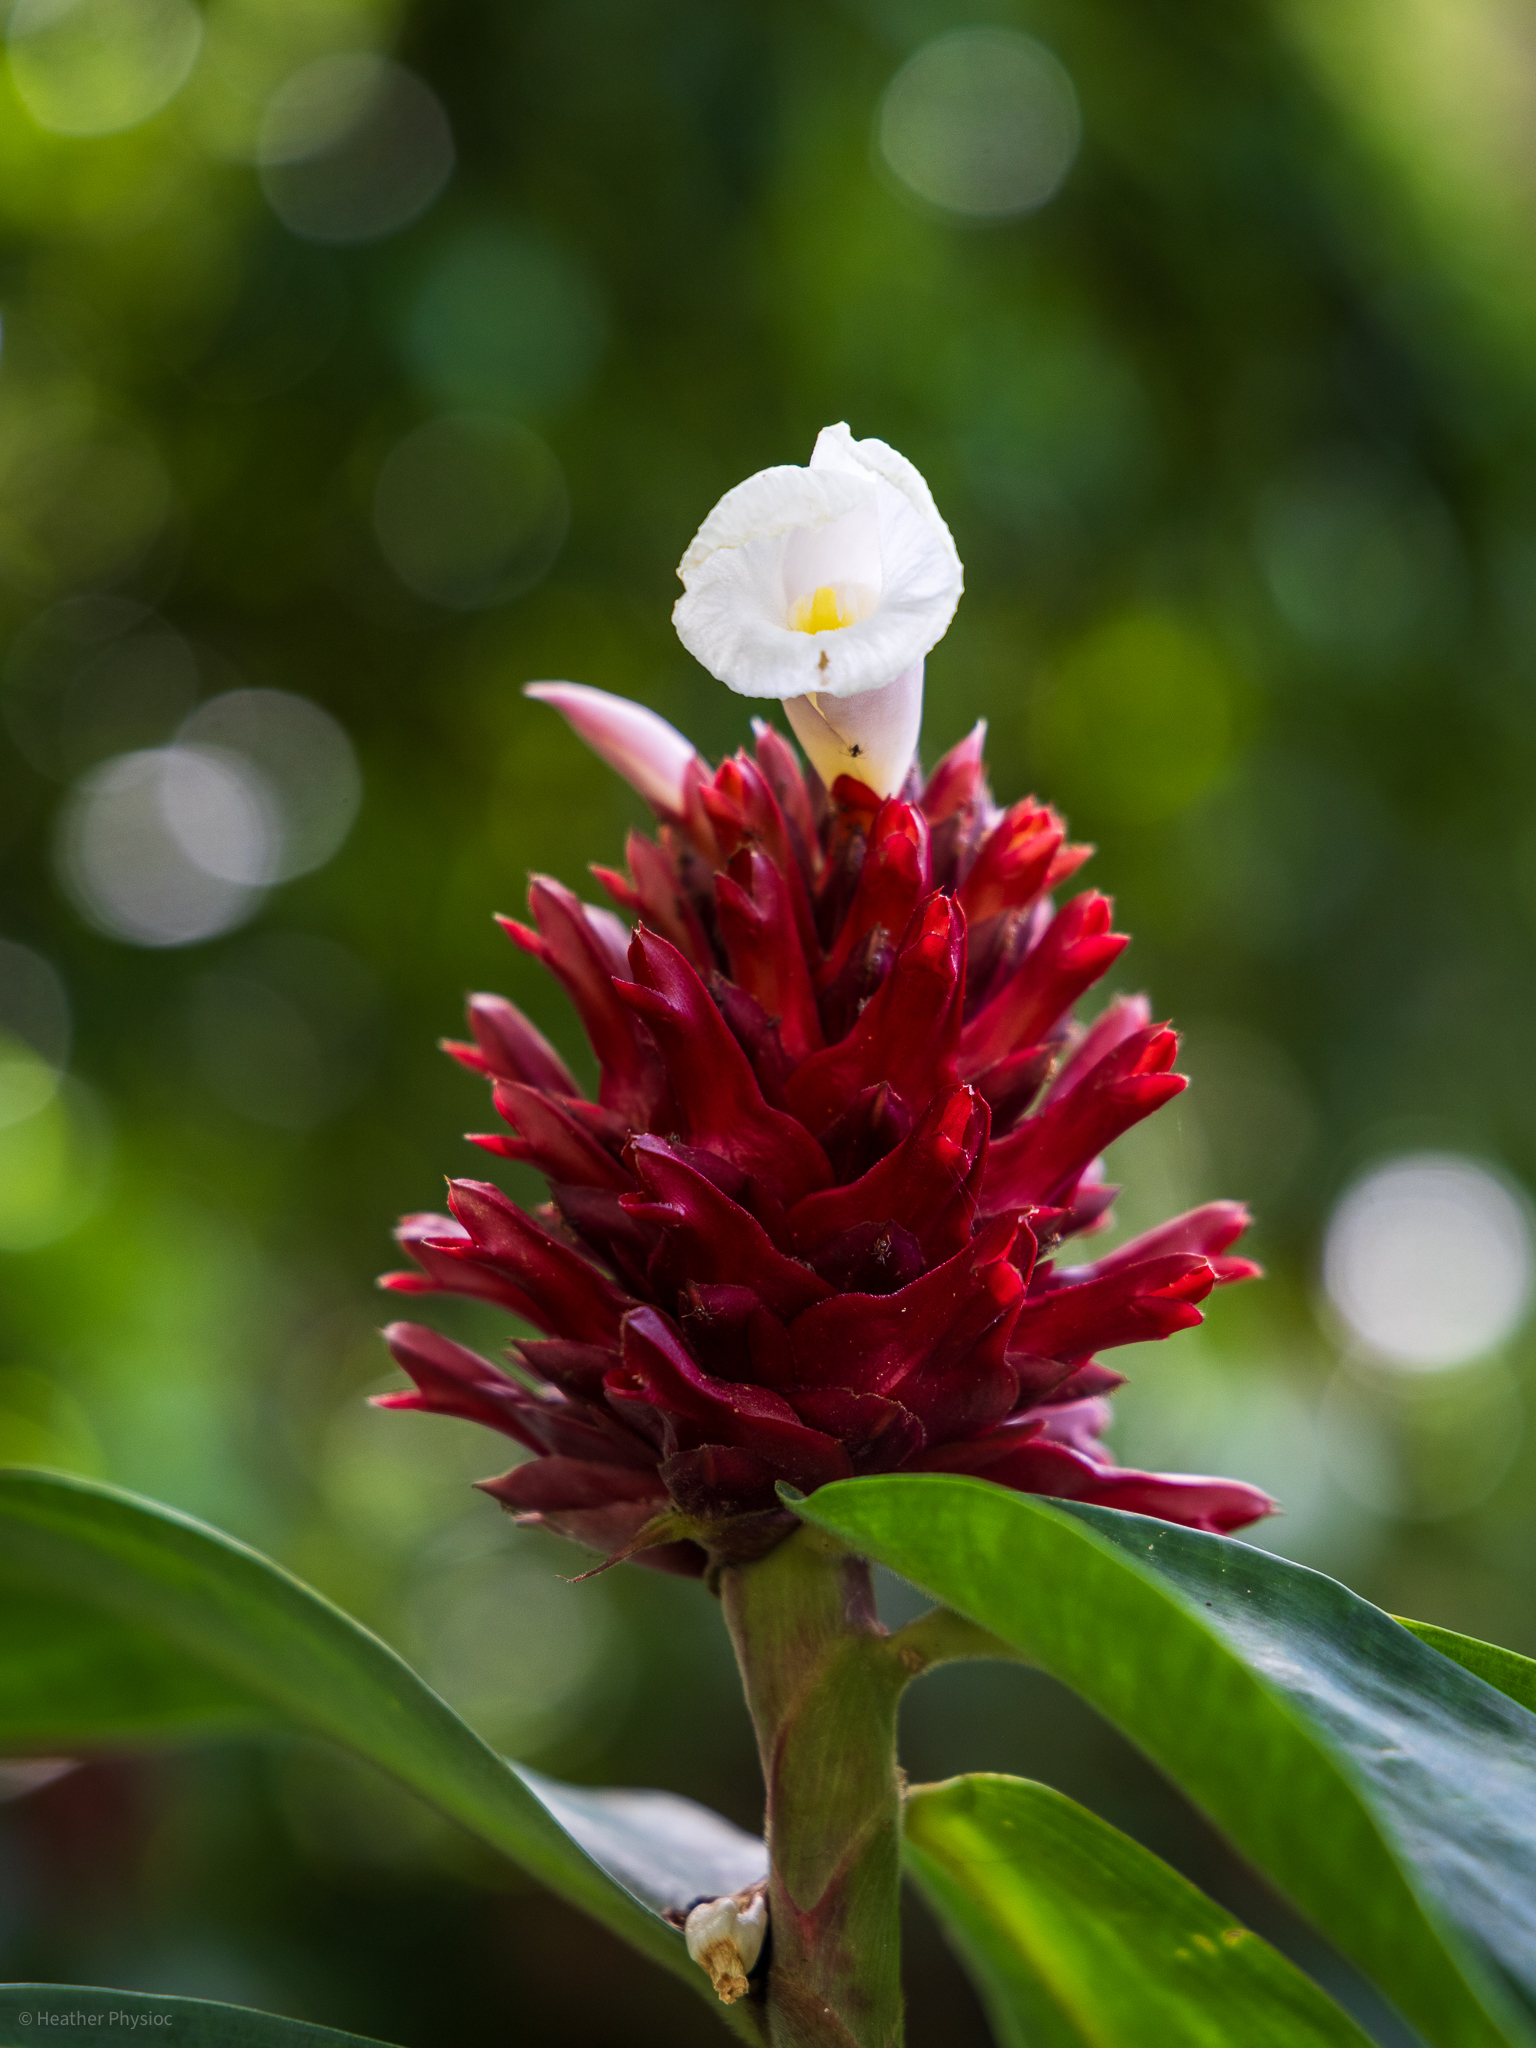 Red crepe ginger bloom with a white flower at Waimea Falls botanical garden on Oahu, Hawaii